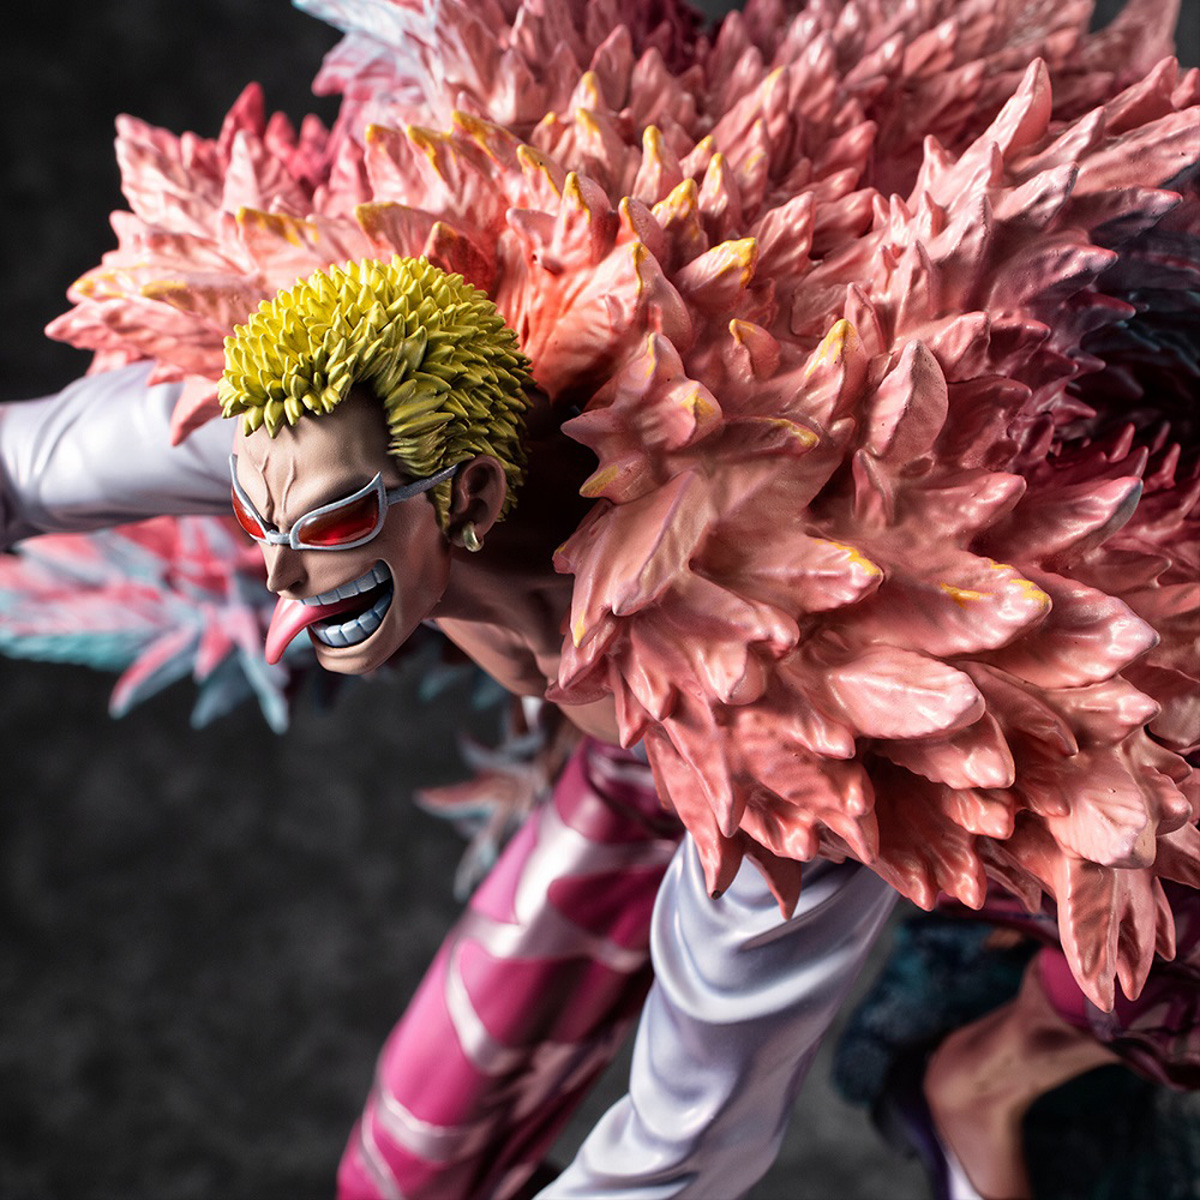 Why Donquixote Doflamingo Is So Many People's Favorite One Piece Villain -  Crunchyroll News